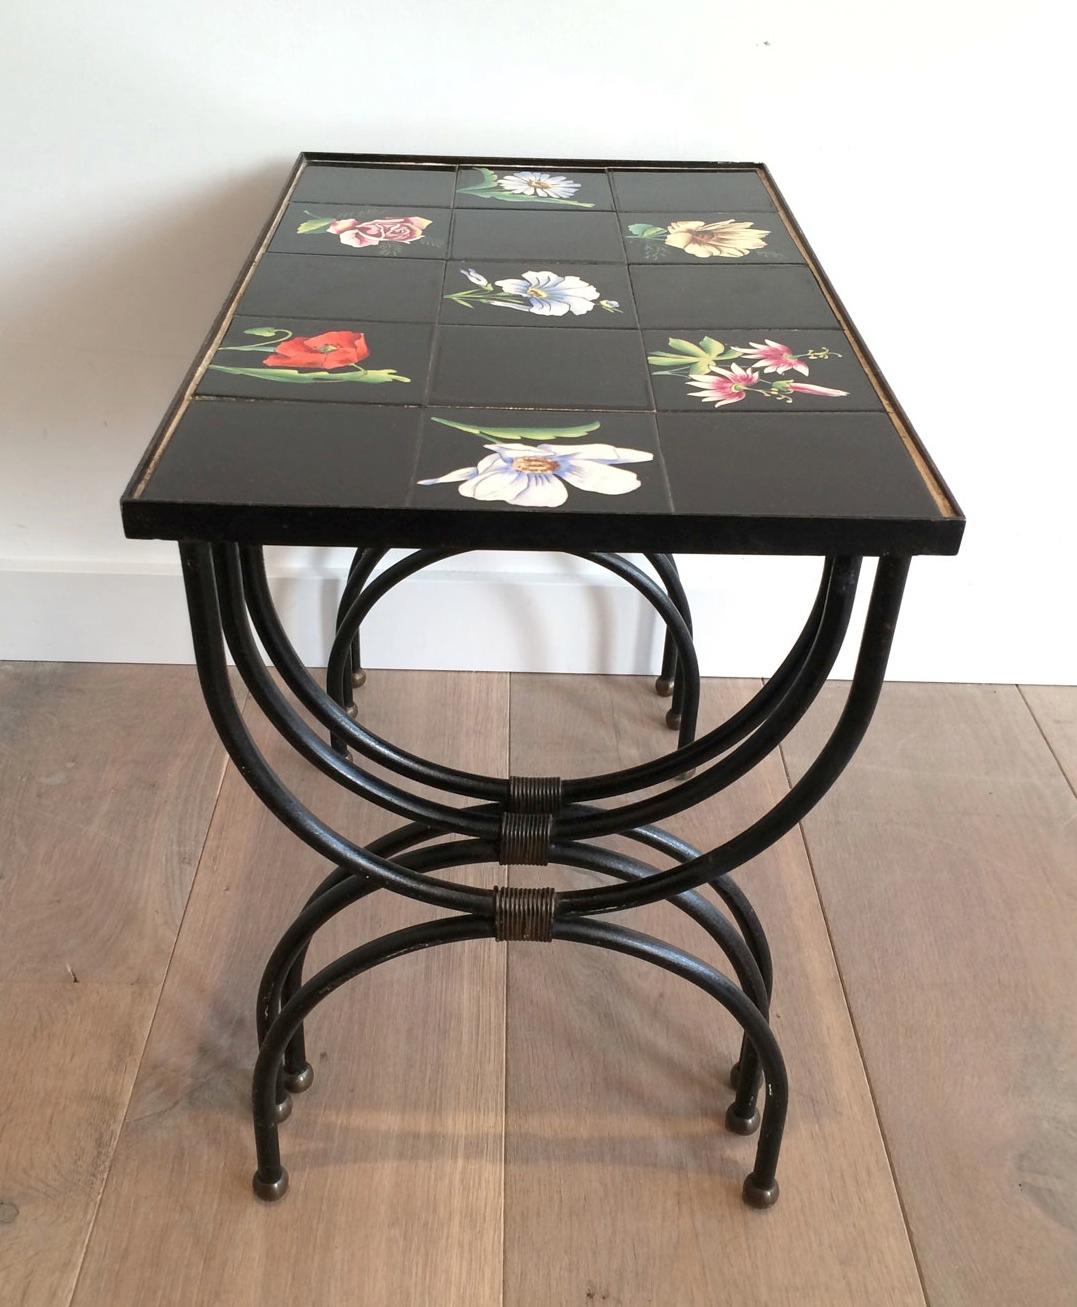 Unusual Ceramic and Black Iron Nesting Tables, French Work, circa 1950 For Sale 4